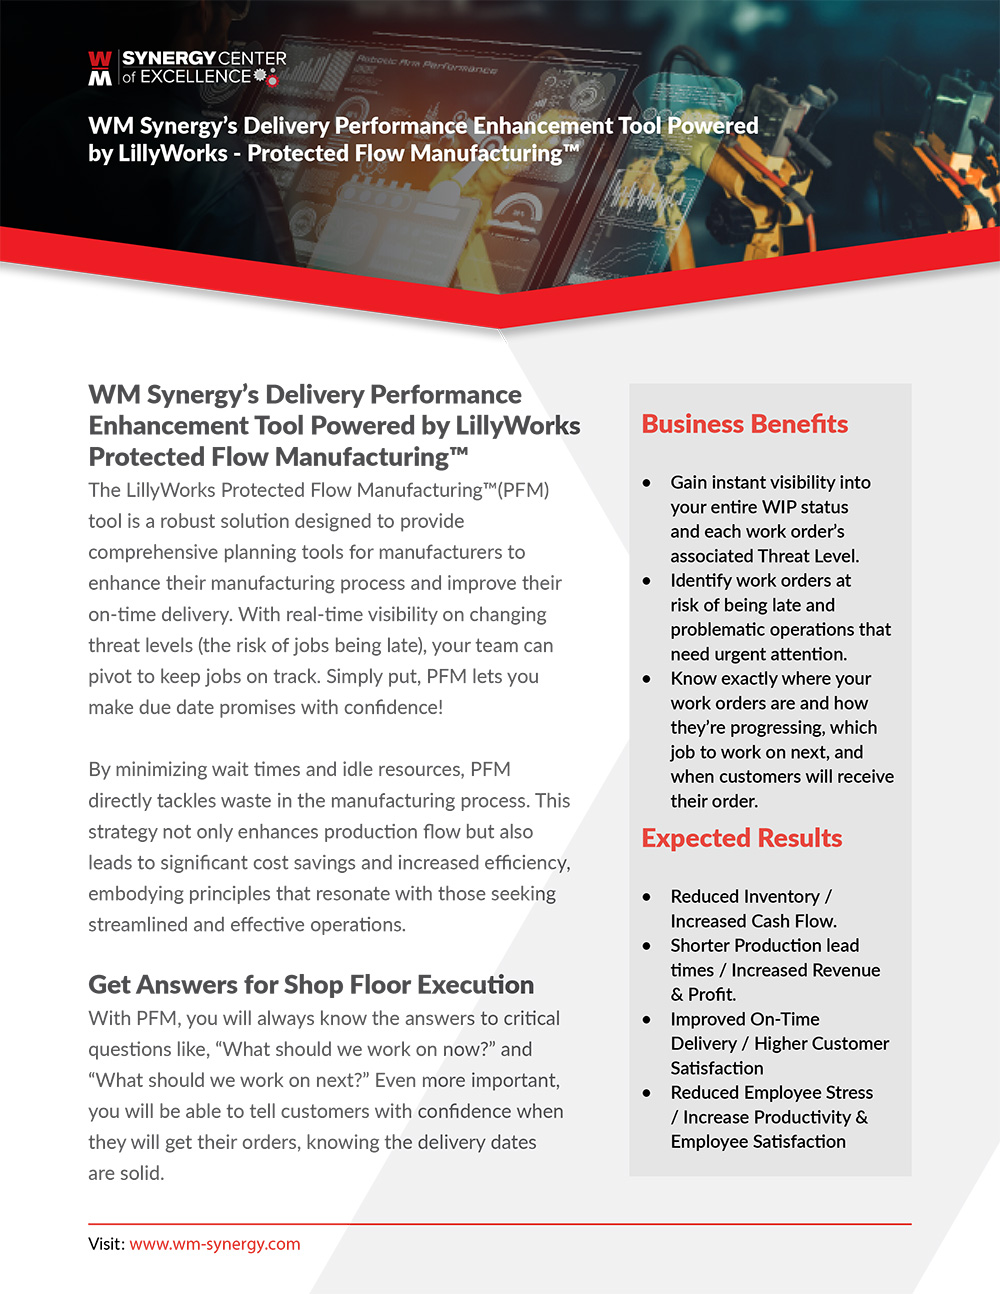 Protected Flow Manufacturing Powered by LillyWorks